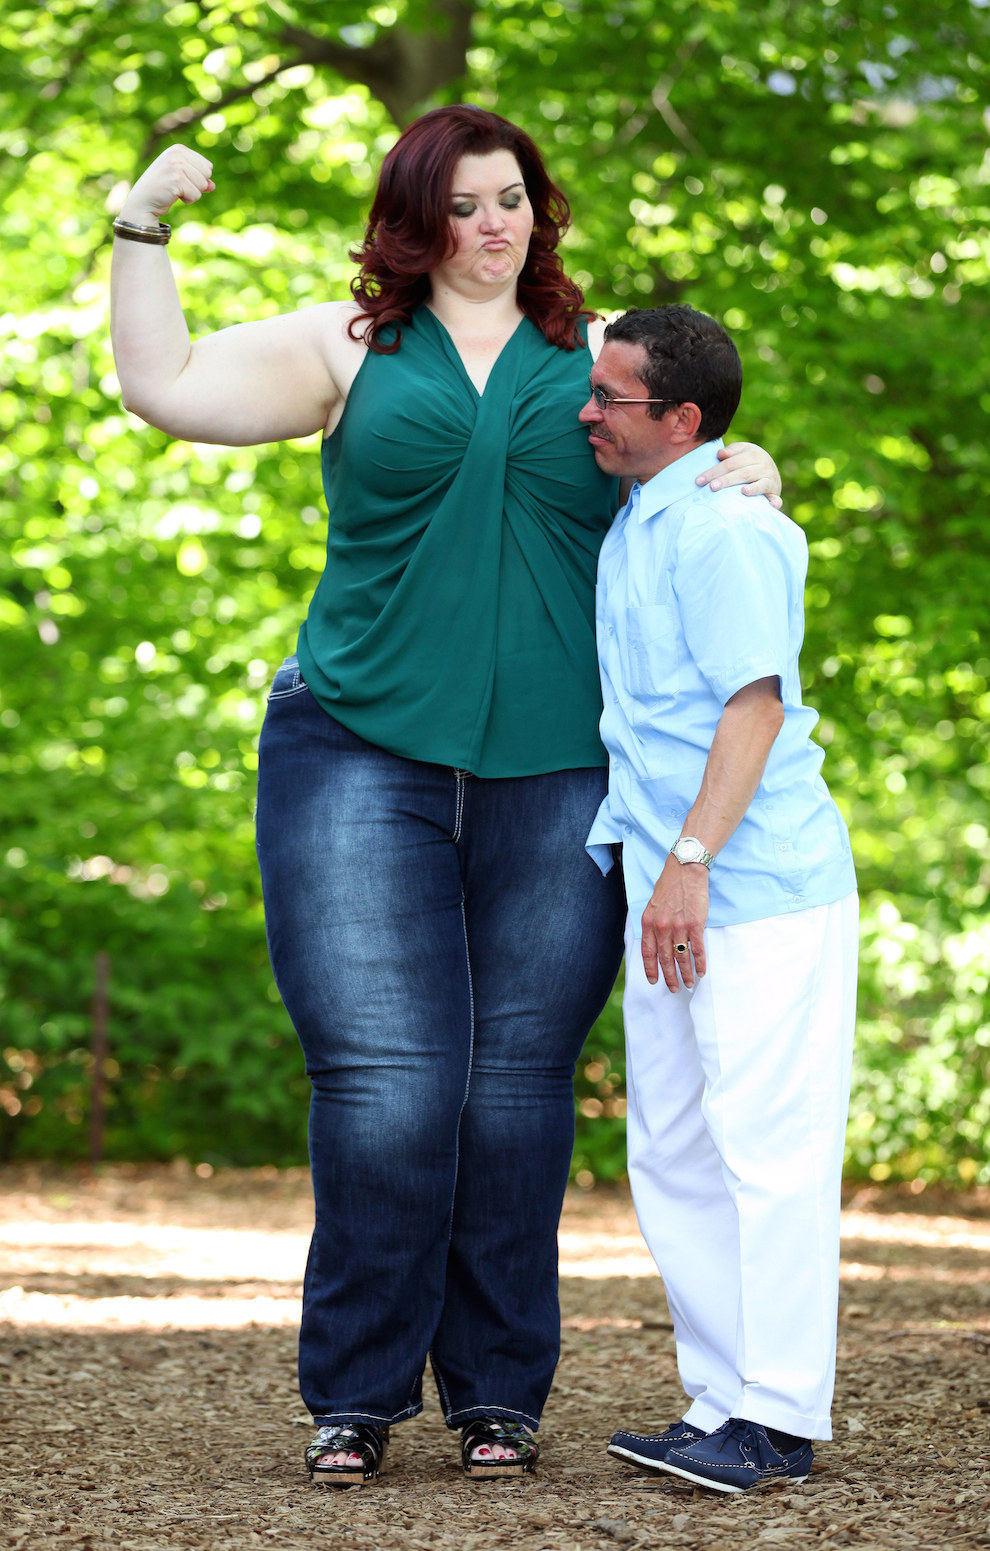 This Woman Is 6 Foot 3 Inches Tall, Weighs 20 Stone, And Gets Paid